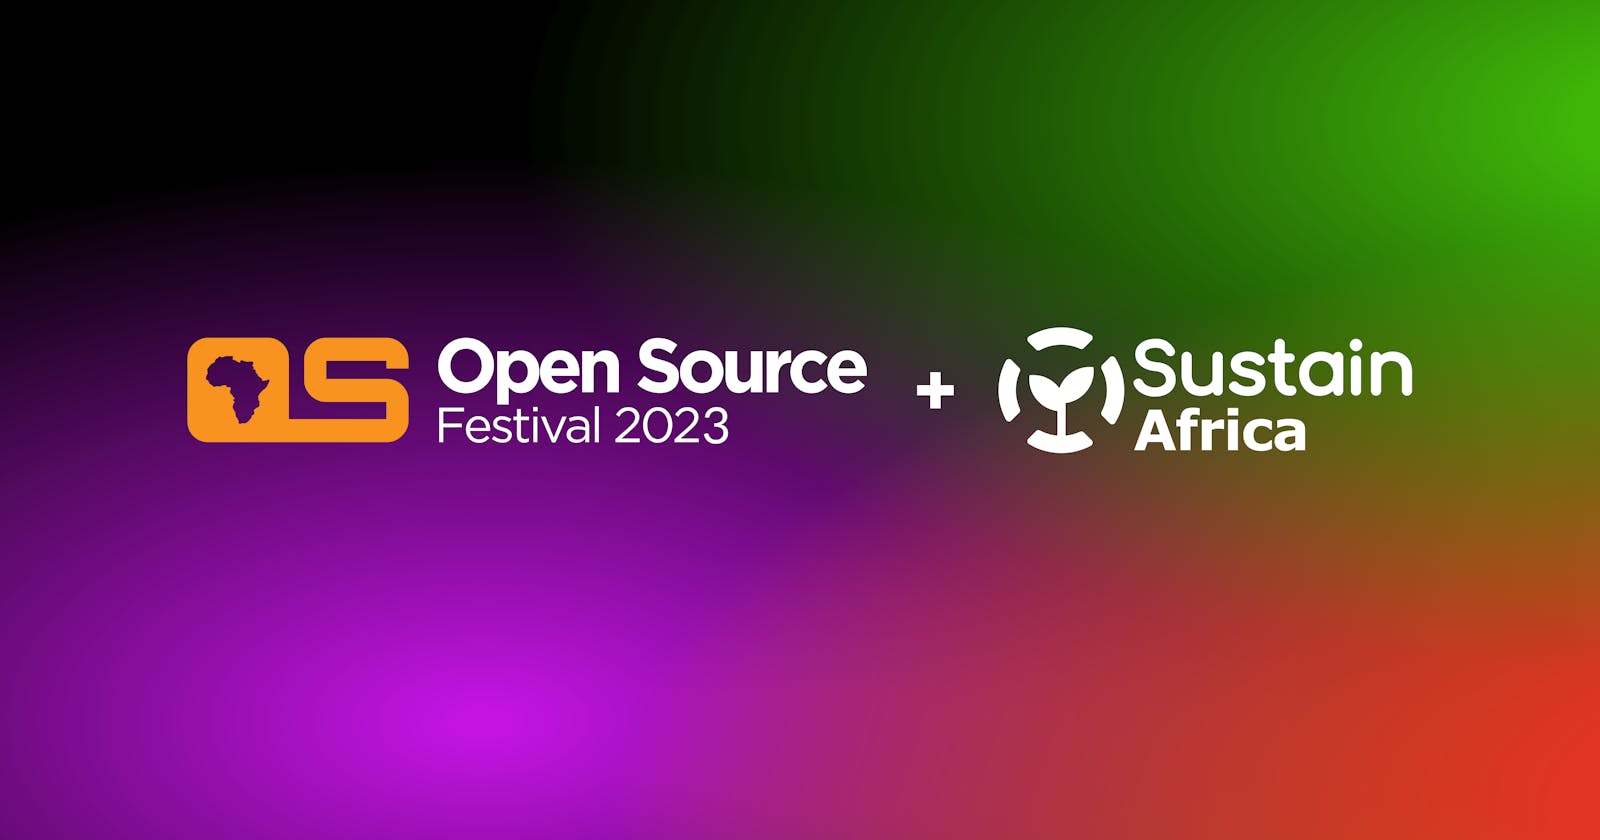 Open Source Festival 2023: Sustainability for Growth